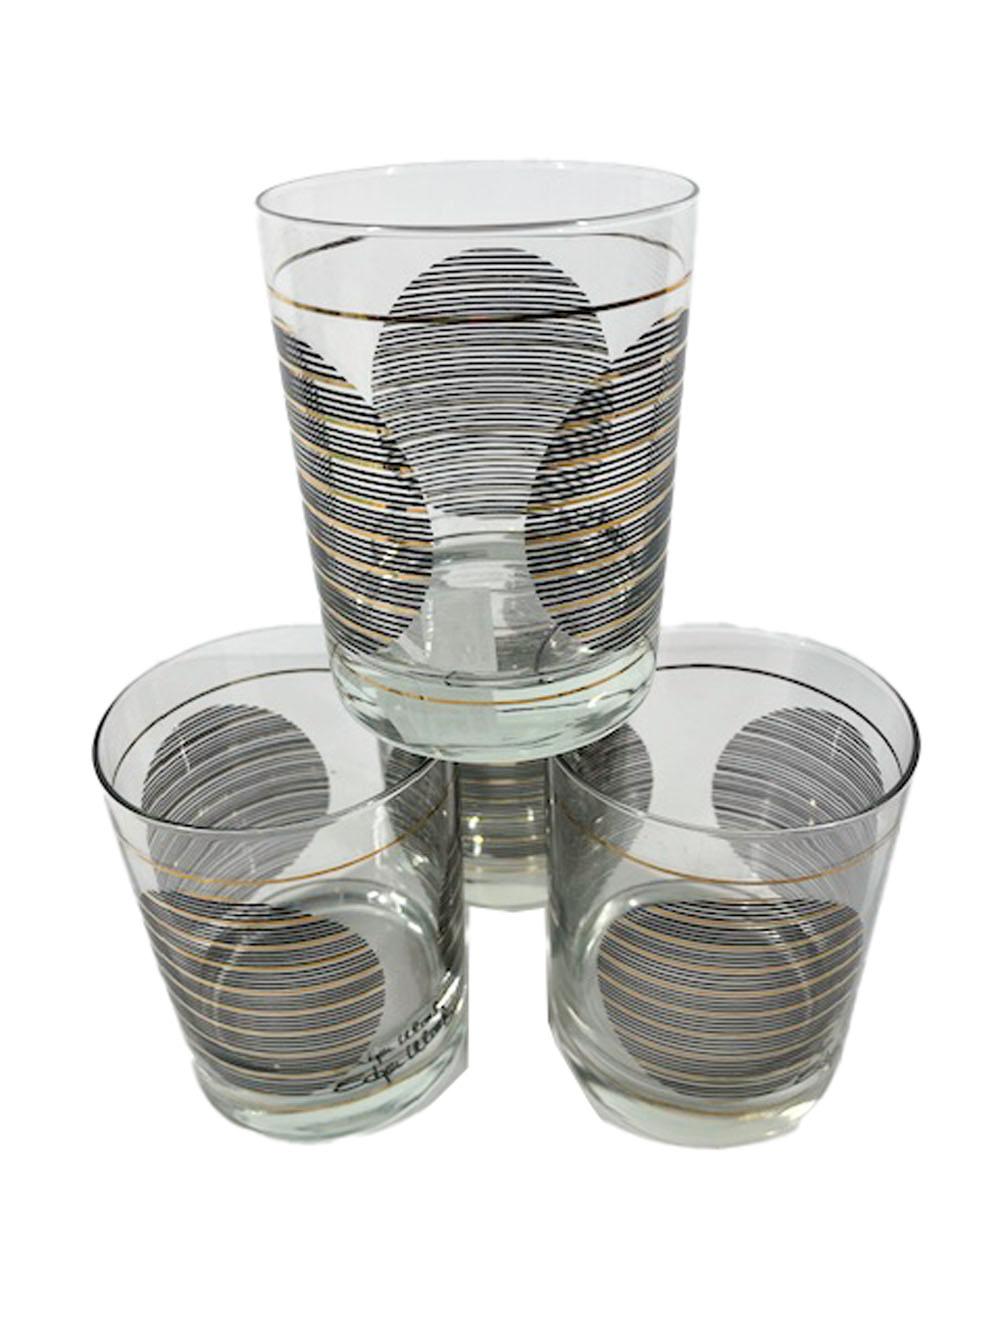 Set of four Shelton-Ware double rocks glasses decorated with three disks made of a series of fine lines in black enamel with every fifth line being 22k gold.